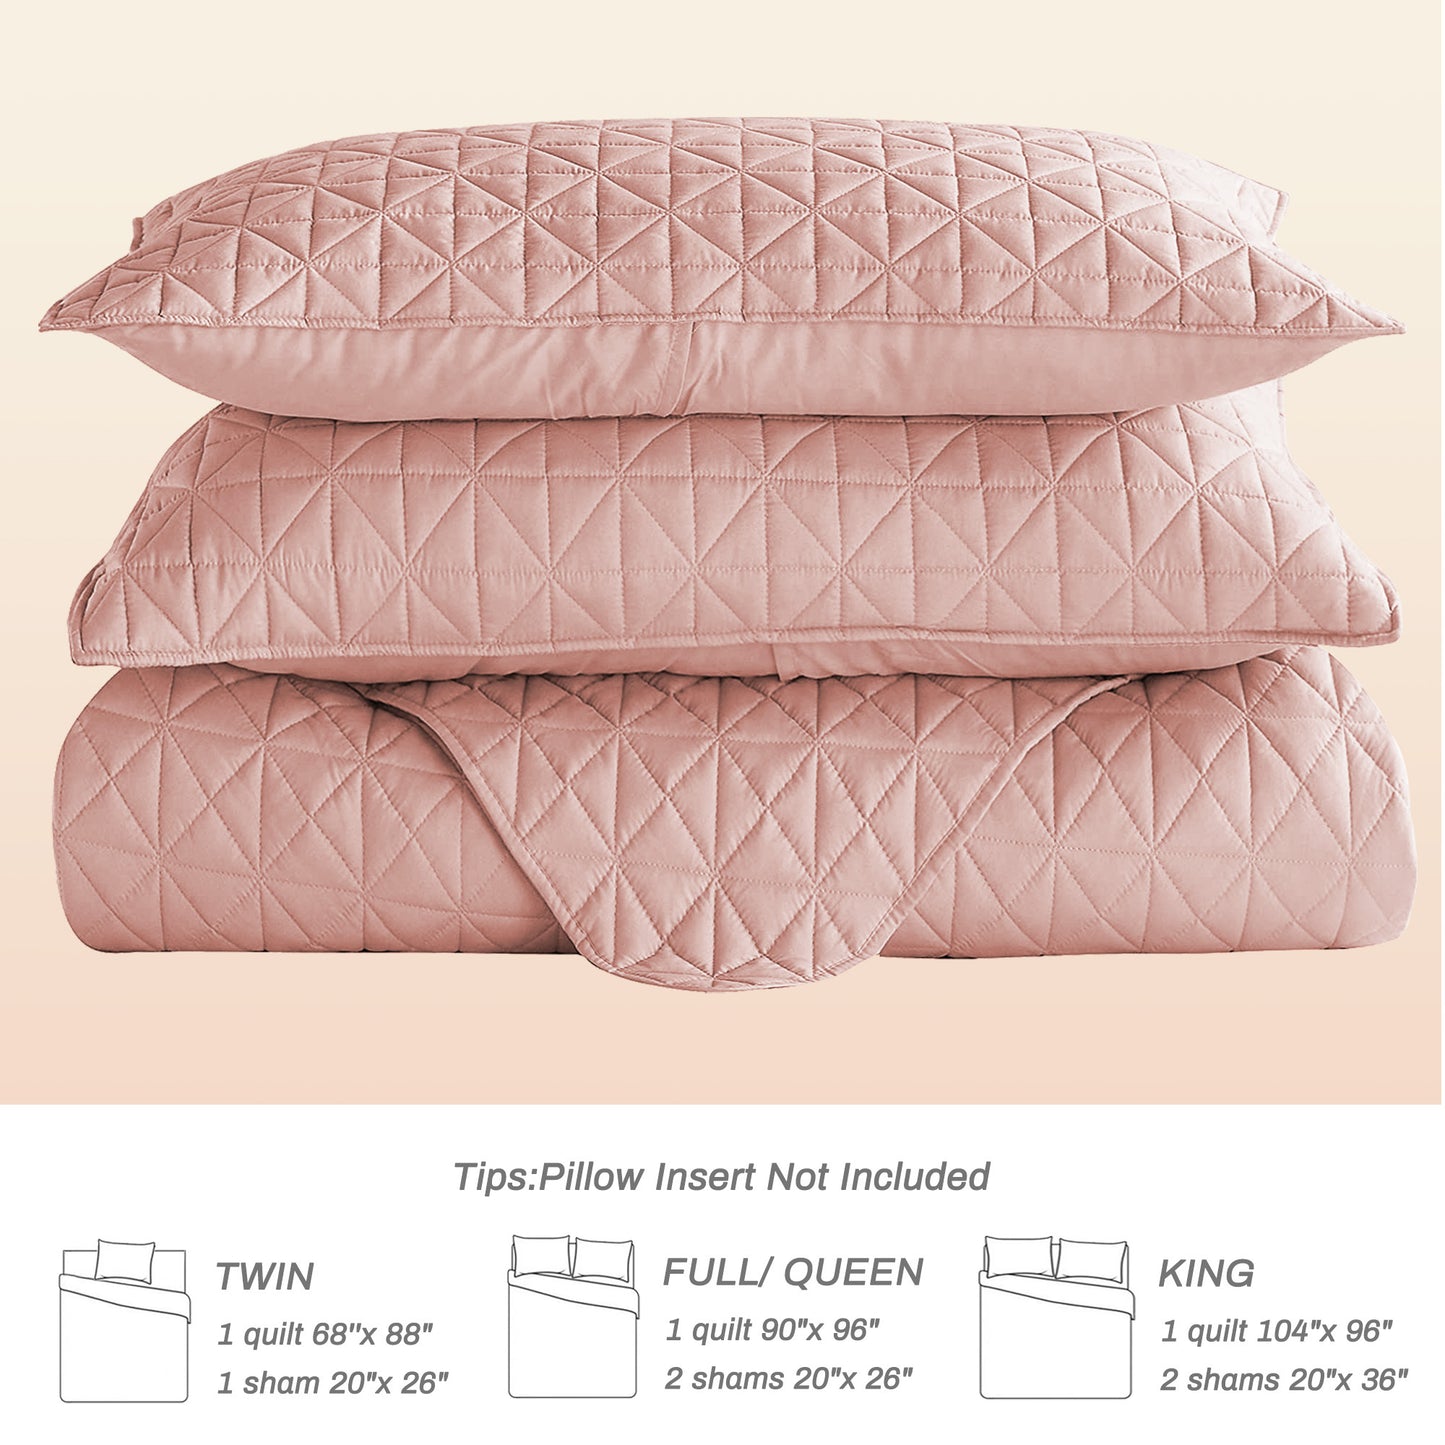 Exclusivo Mezcla Queen Quilt Bedding Set for All Seasons, Lightweight Soft Pink Quilts Queen Size Bedspreads Coverlets Bed Cover with Geometric Stitched Pattern, (1 Quilt, 2 Pillow Shams)